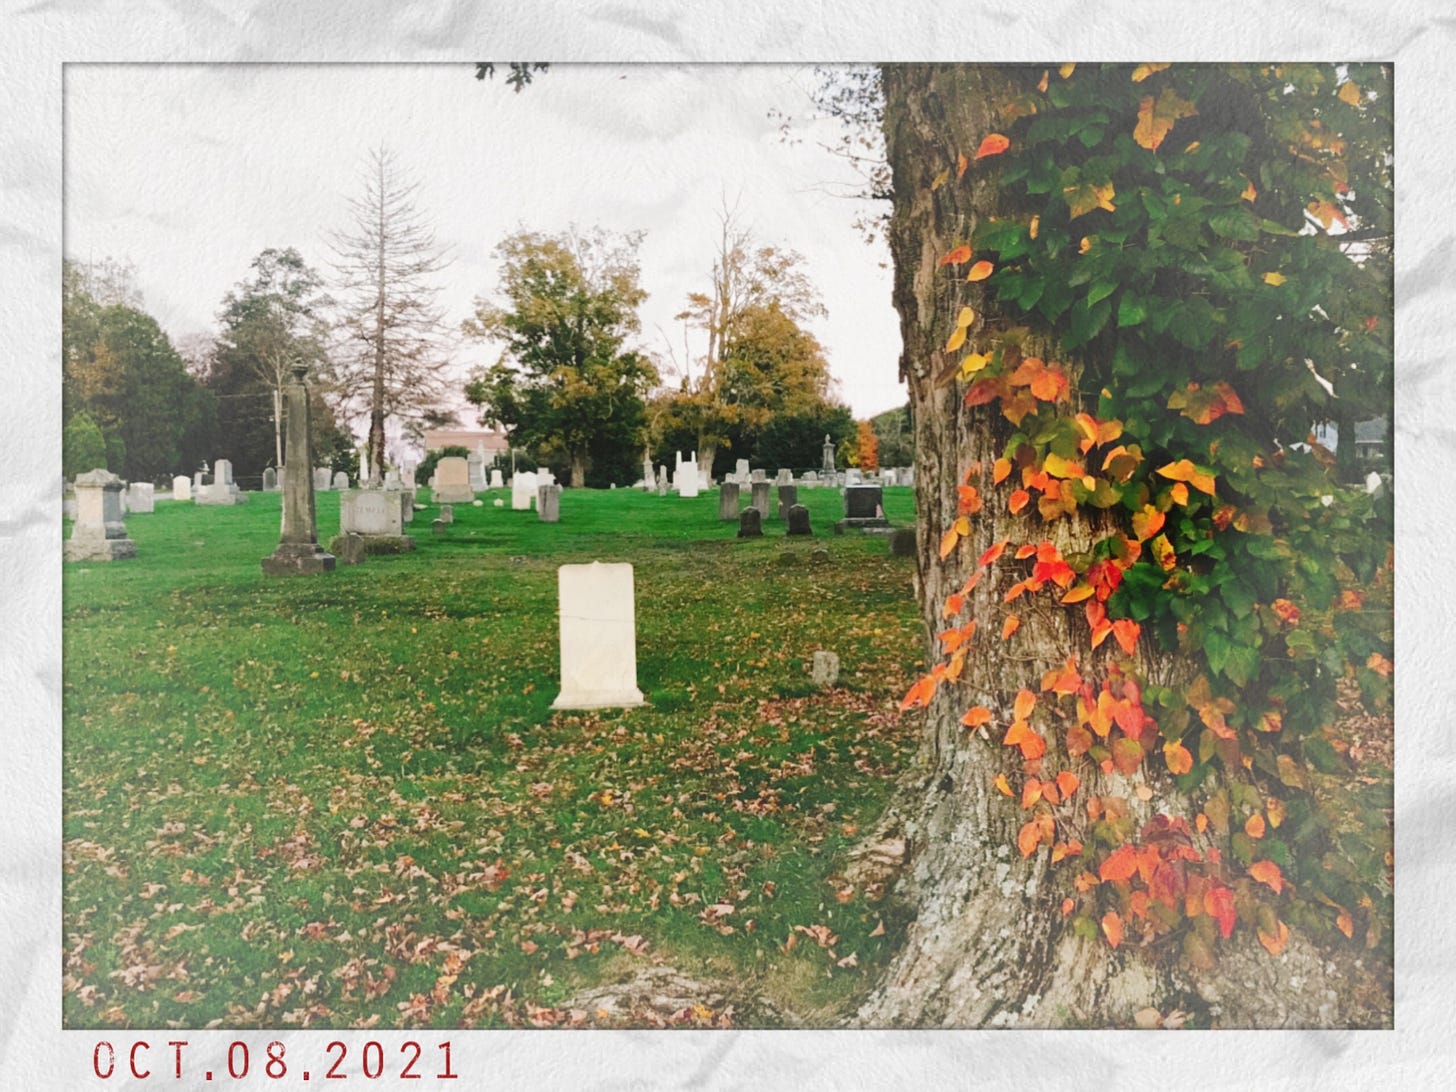 Picture of a cemetery with older grave markers, leaves on the ground, and orange ivy wrapped around a tree trunk. Dated October 8, 2021.